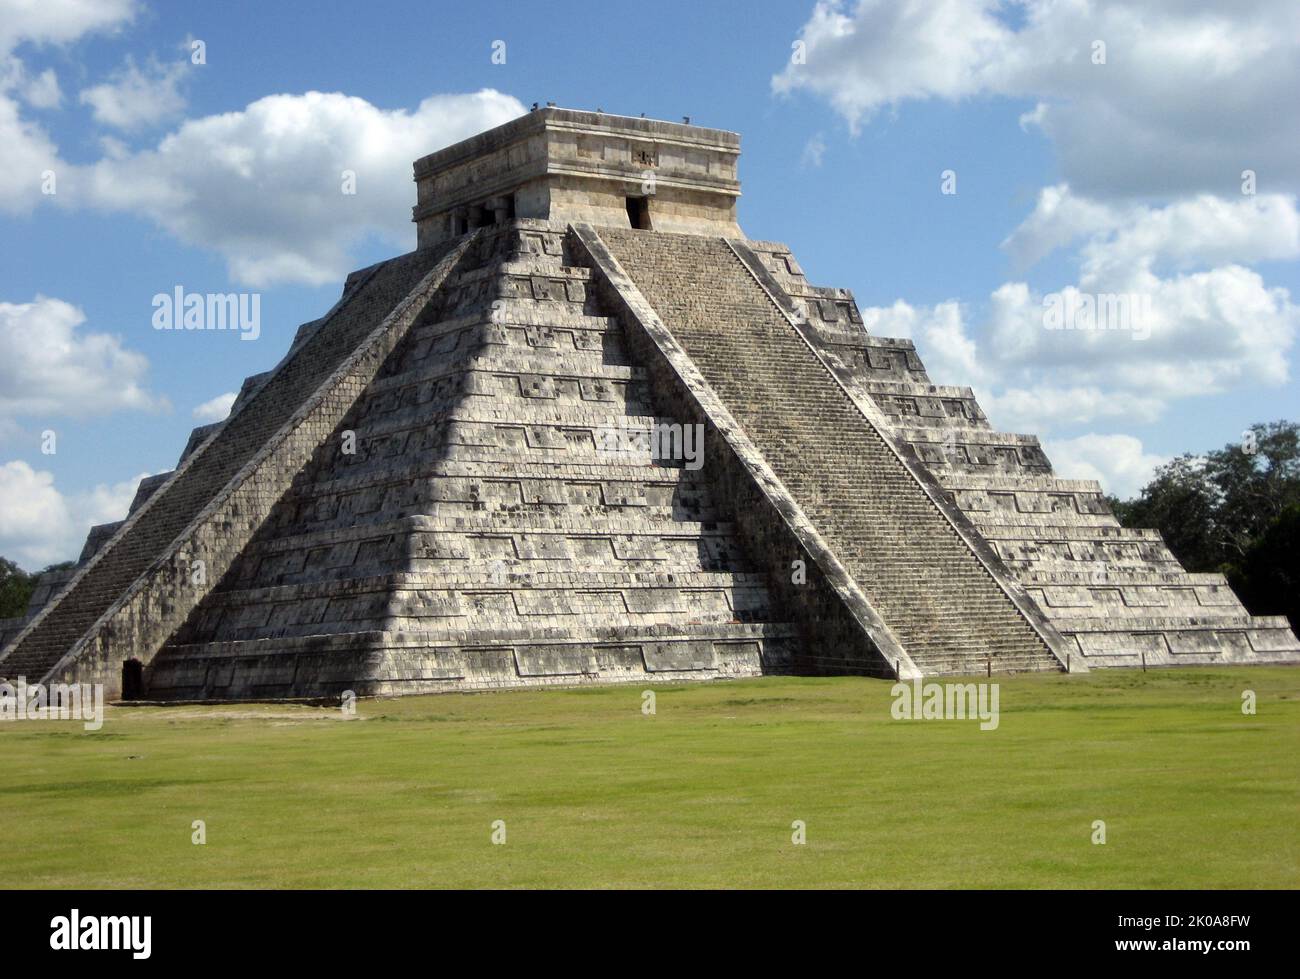 La Piramide, known as the Temple of Kukulca, a Mesoamerican step-pyramid that dominates the centre of the Chichen Itza archaeological site in the Mexican state of Yucatan. The pyramid building is more formally designated by archaeologists as Chichen Itza Structure 5B18. Built by the pre-Columbian Maya civilization between the 8th and 12th centuries AD, the pyramid served as a temple to the deity Kukulcan, the Yucatec Maya Feathered Serpent deity closely related to Quetzalcoatl Stock Photo